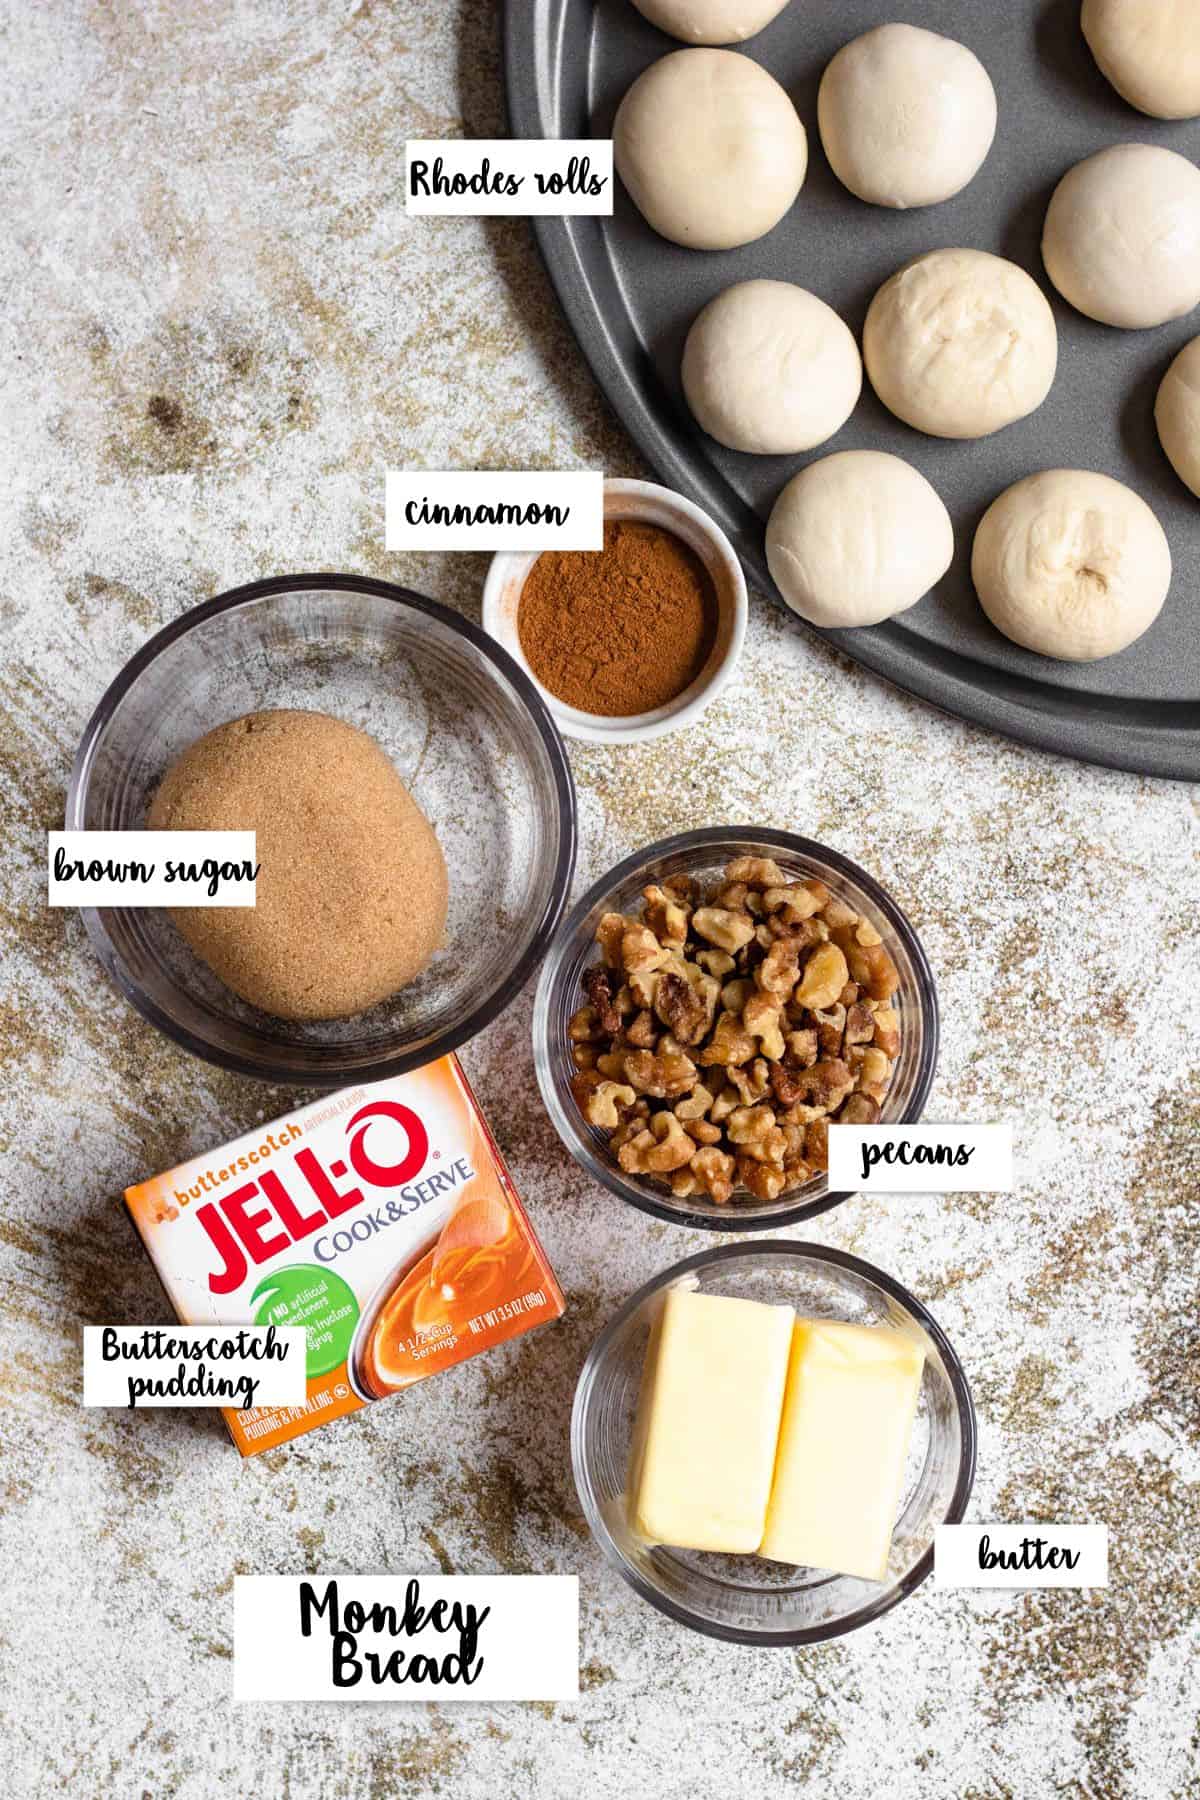 Ingredients shown are used to prepare monkey bread. 